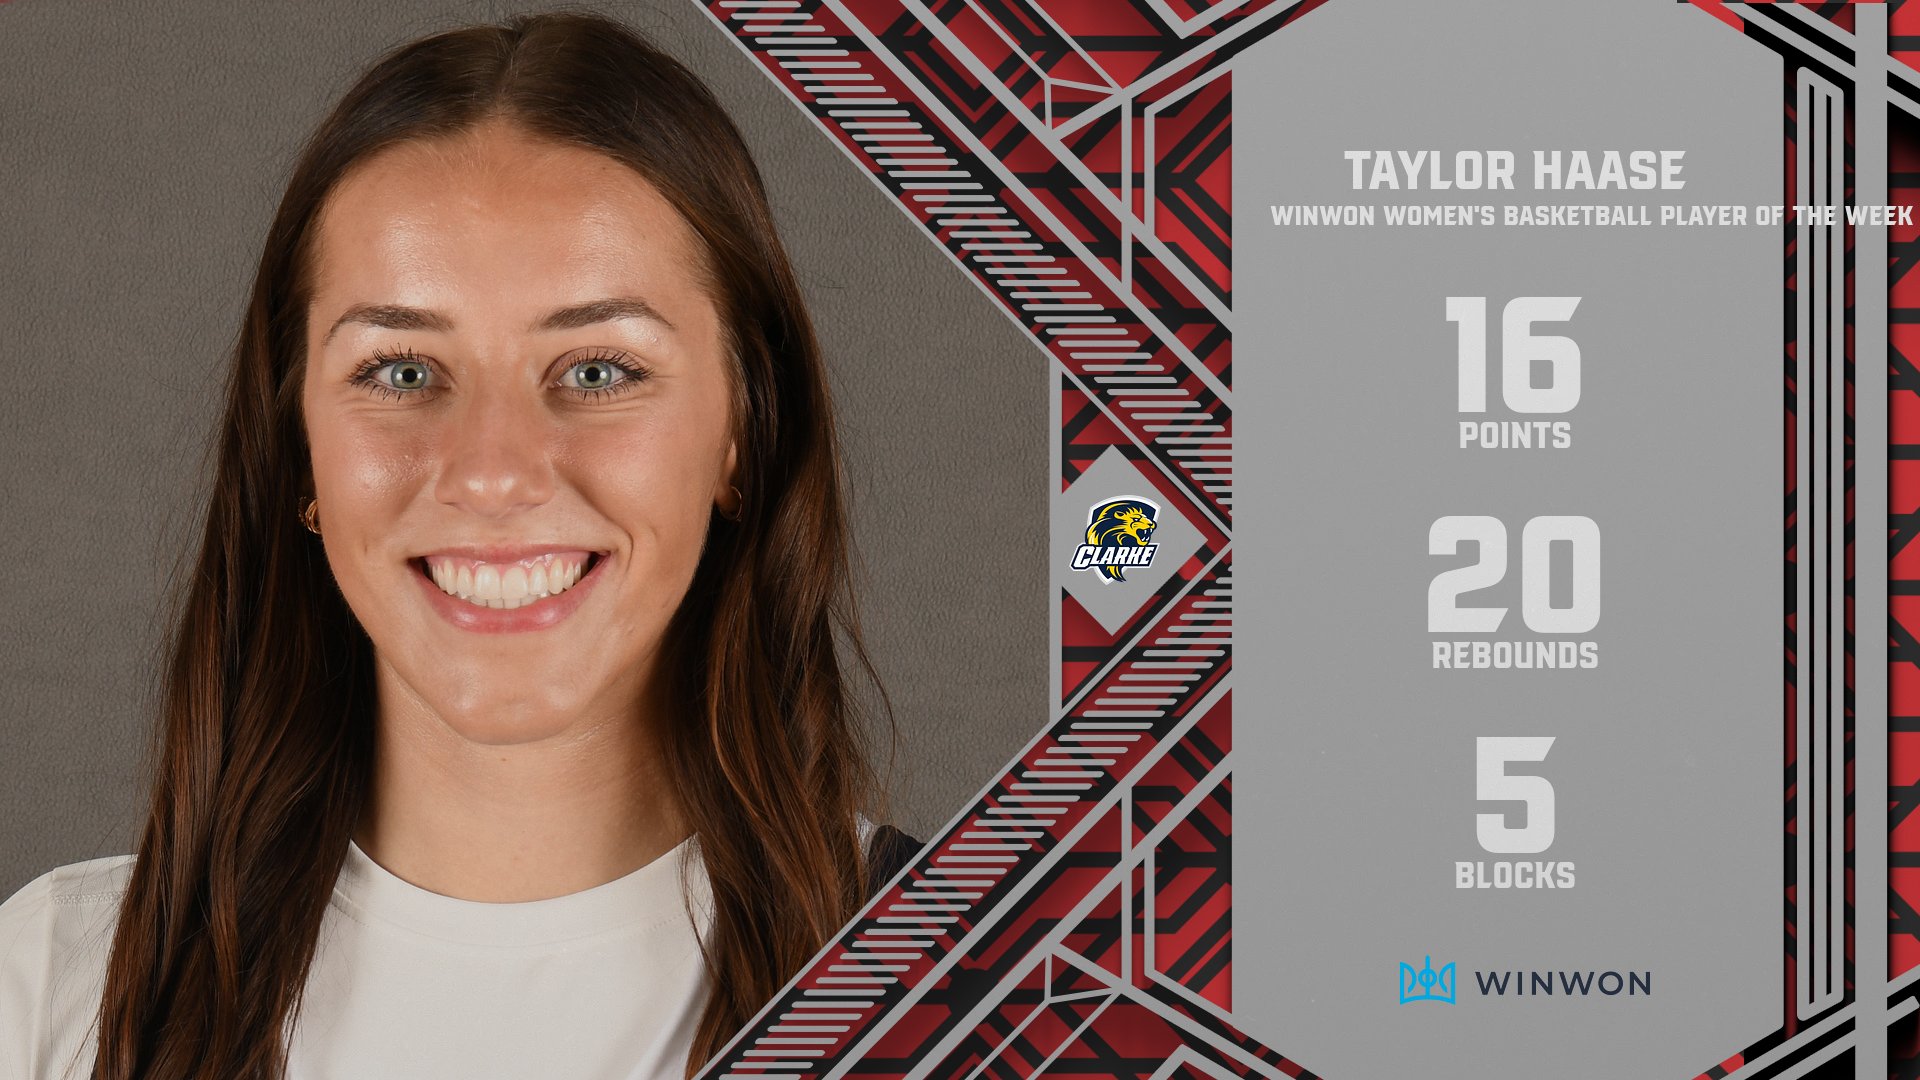 Taylor Haase Selected Back-to-Back WinWon Women’s Basketball Player of the Week